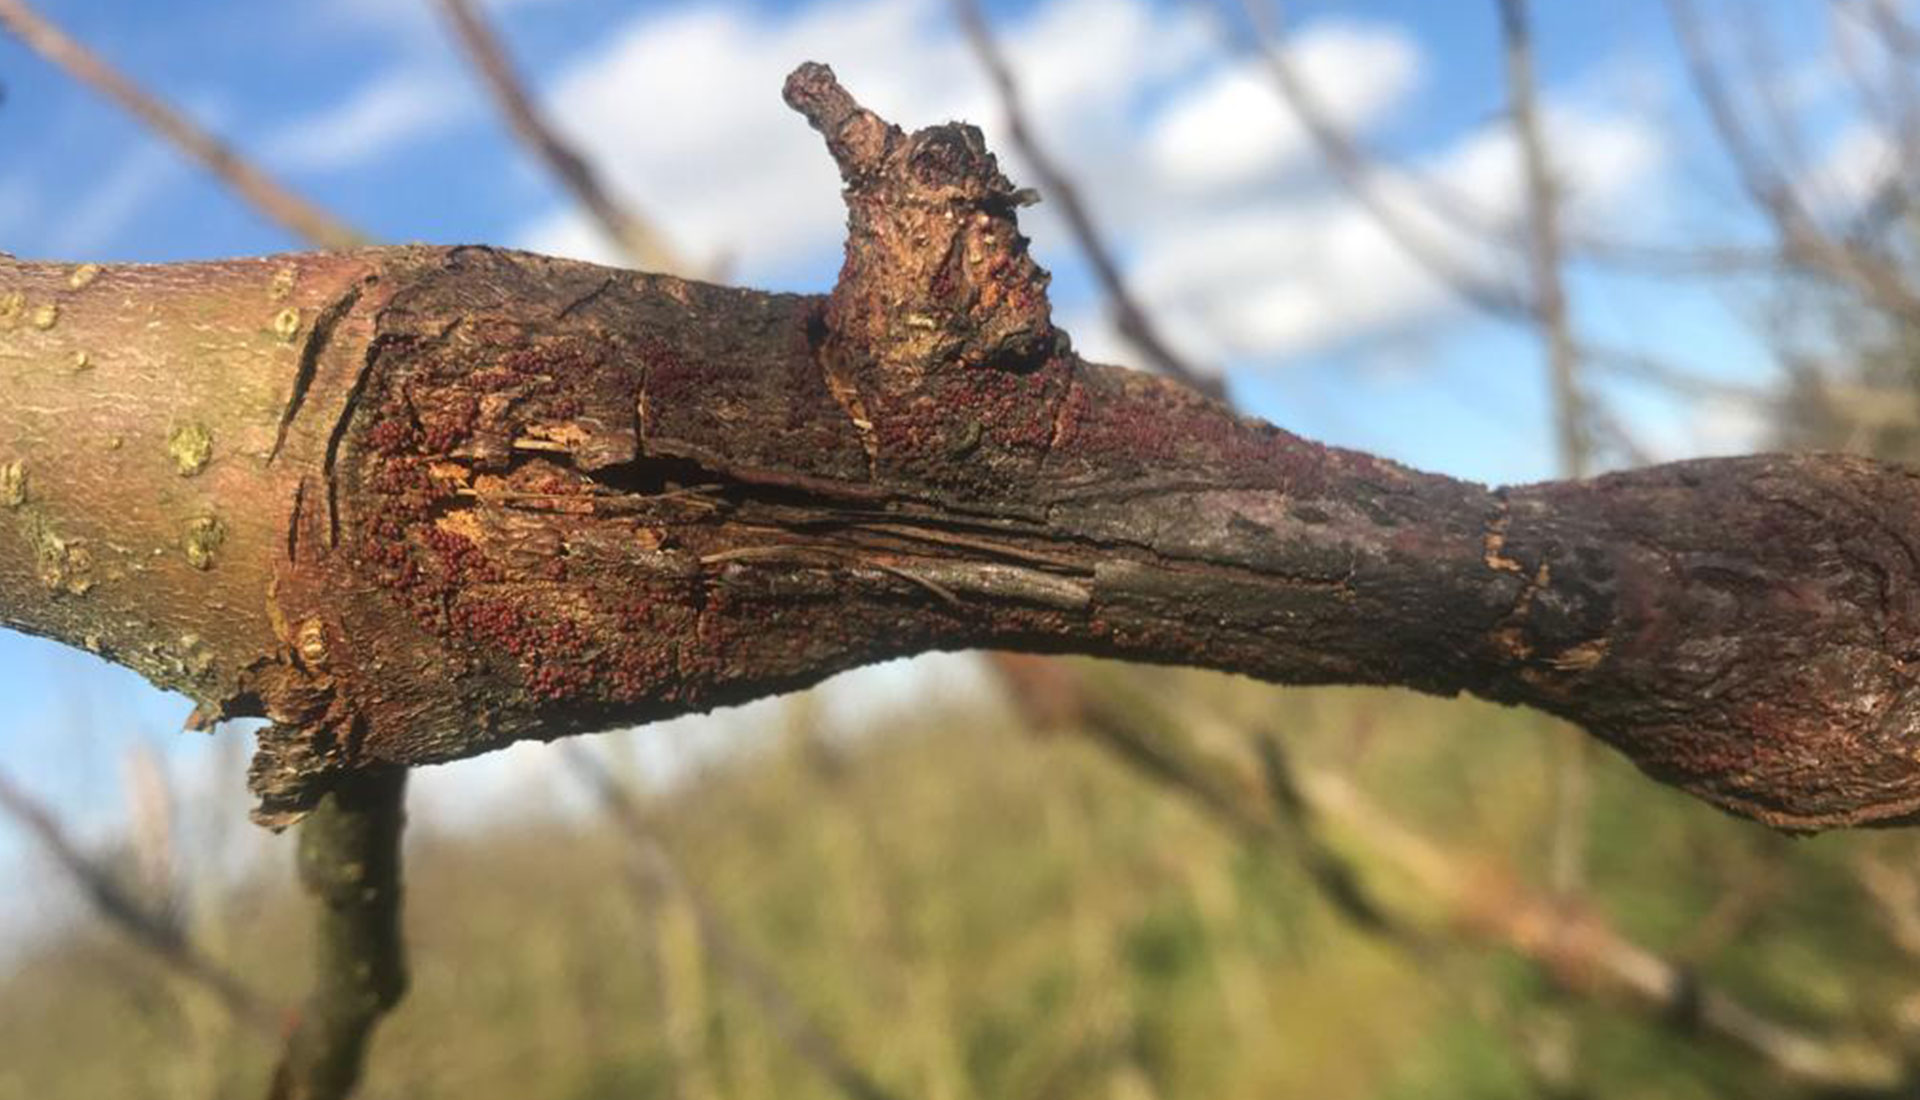 ORCHARD Canker Spores in the middle of winter-without treatment the trees could be devastated by the summer